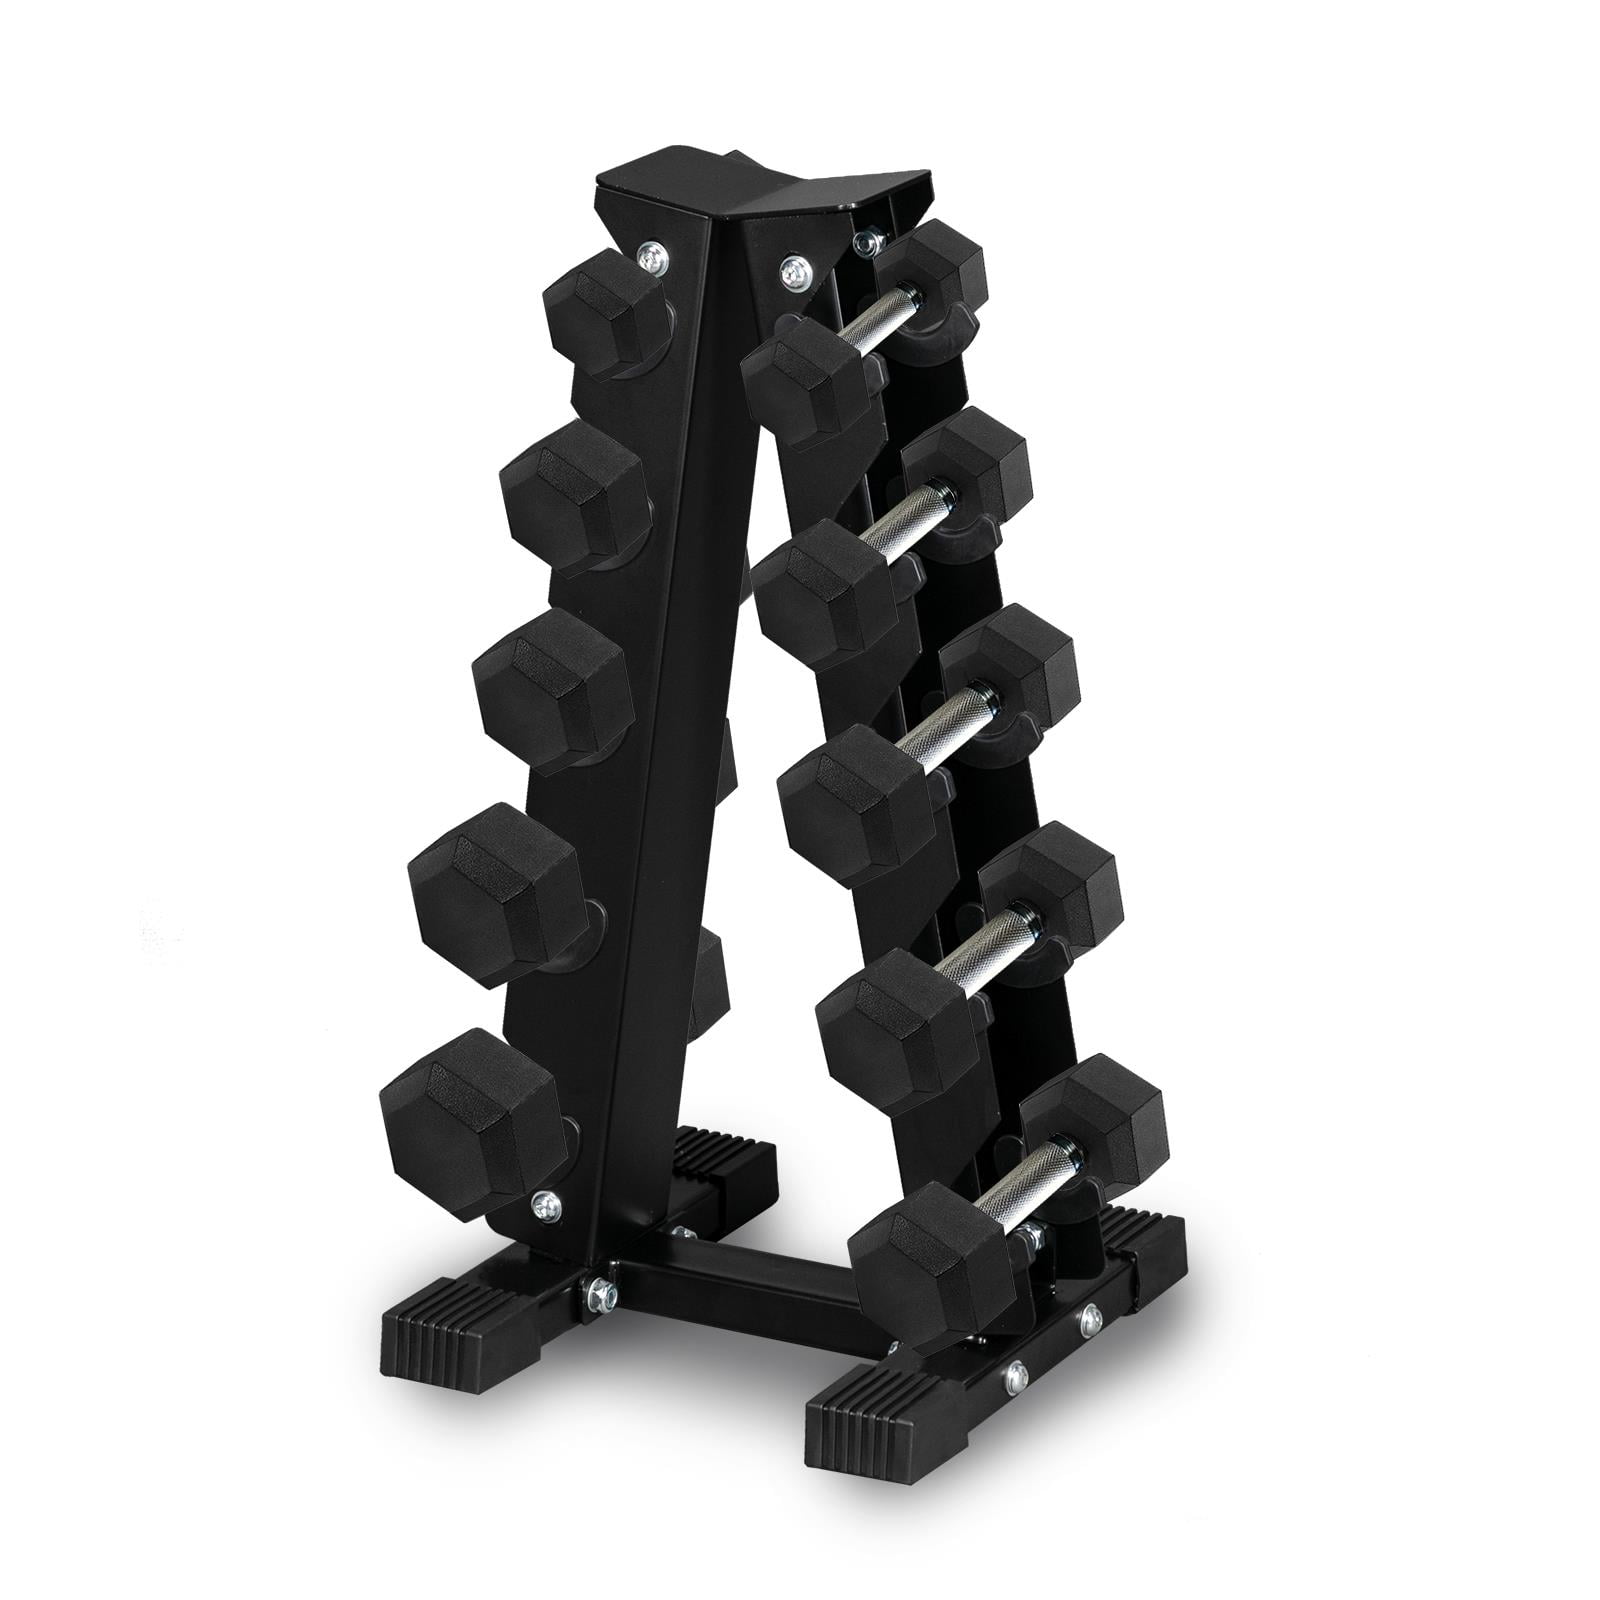 Grassy Dumbbell Stand Adjustable Dumbbell Rack Metal 220LBS for Home Workout ... 